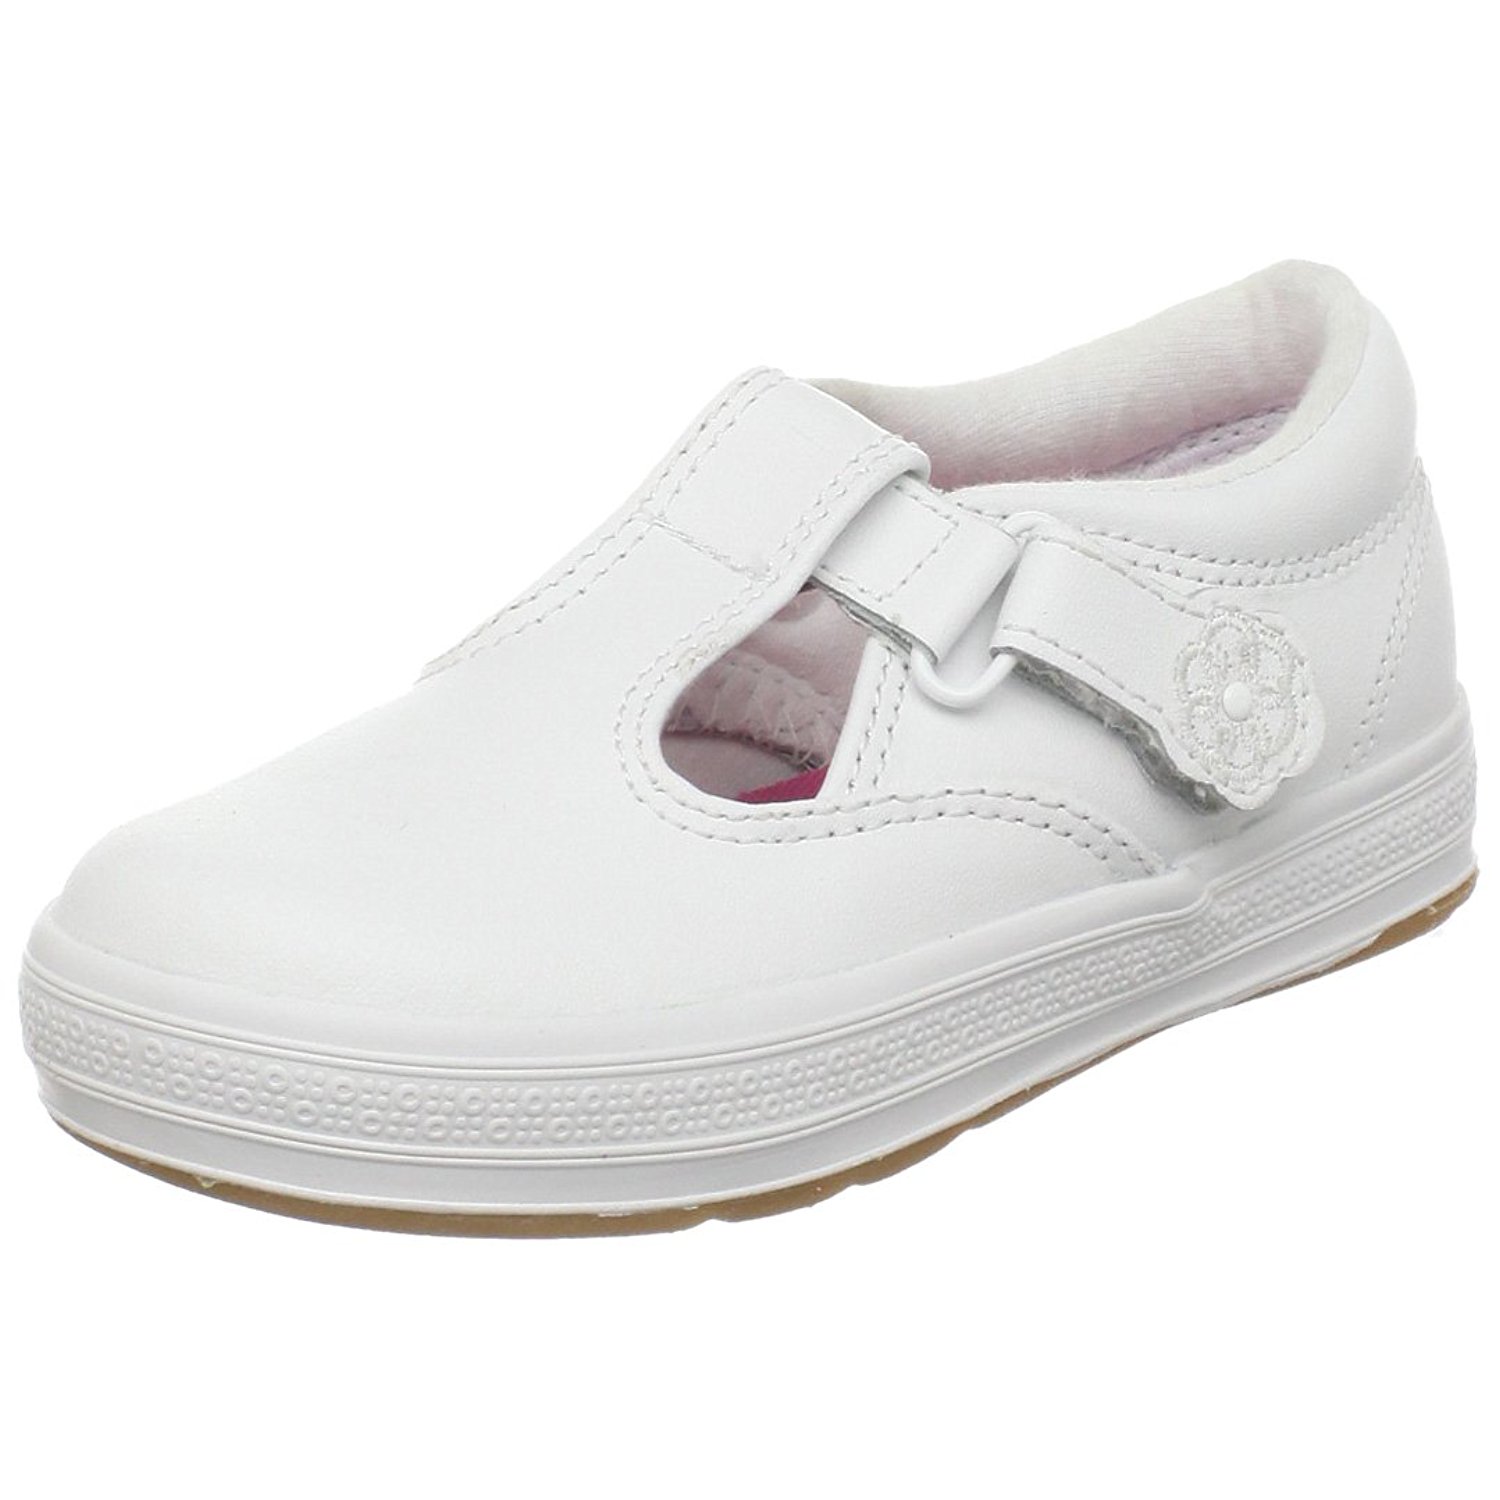 white leather keds for kids